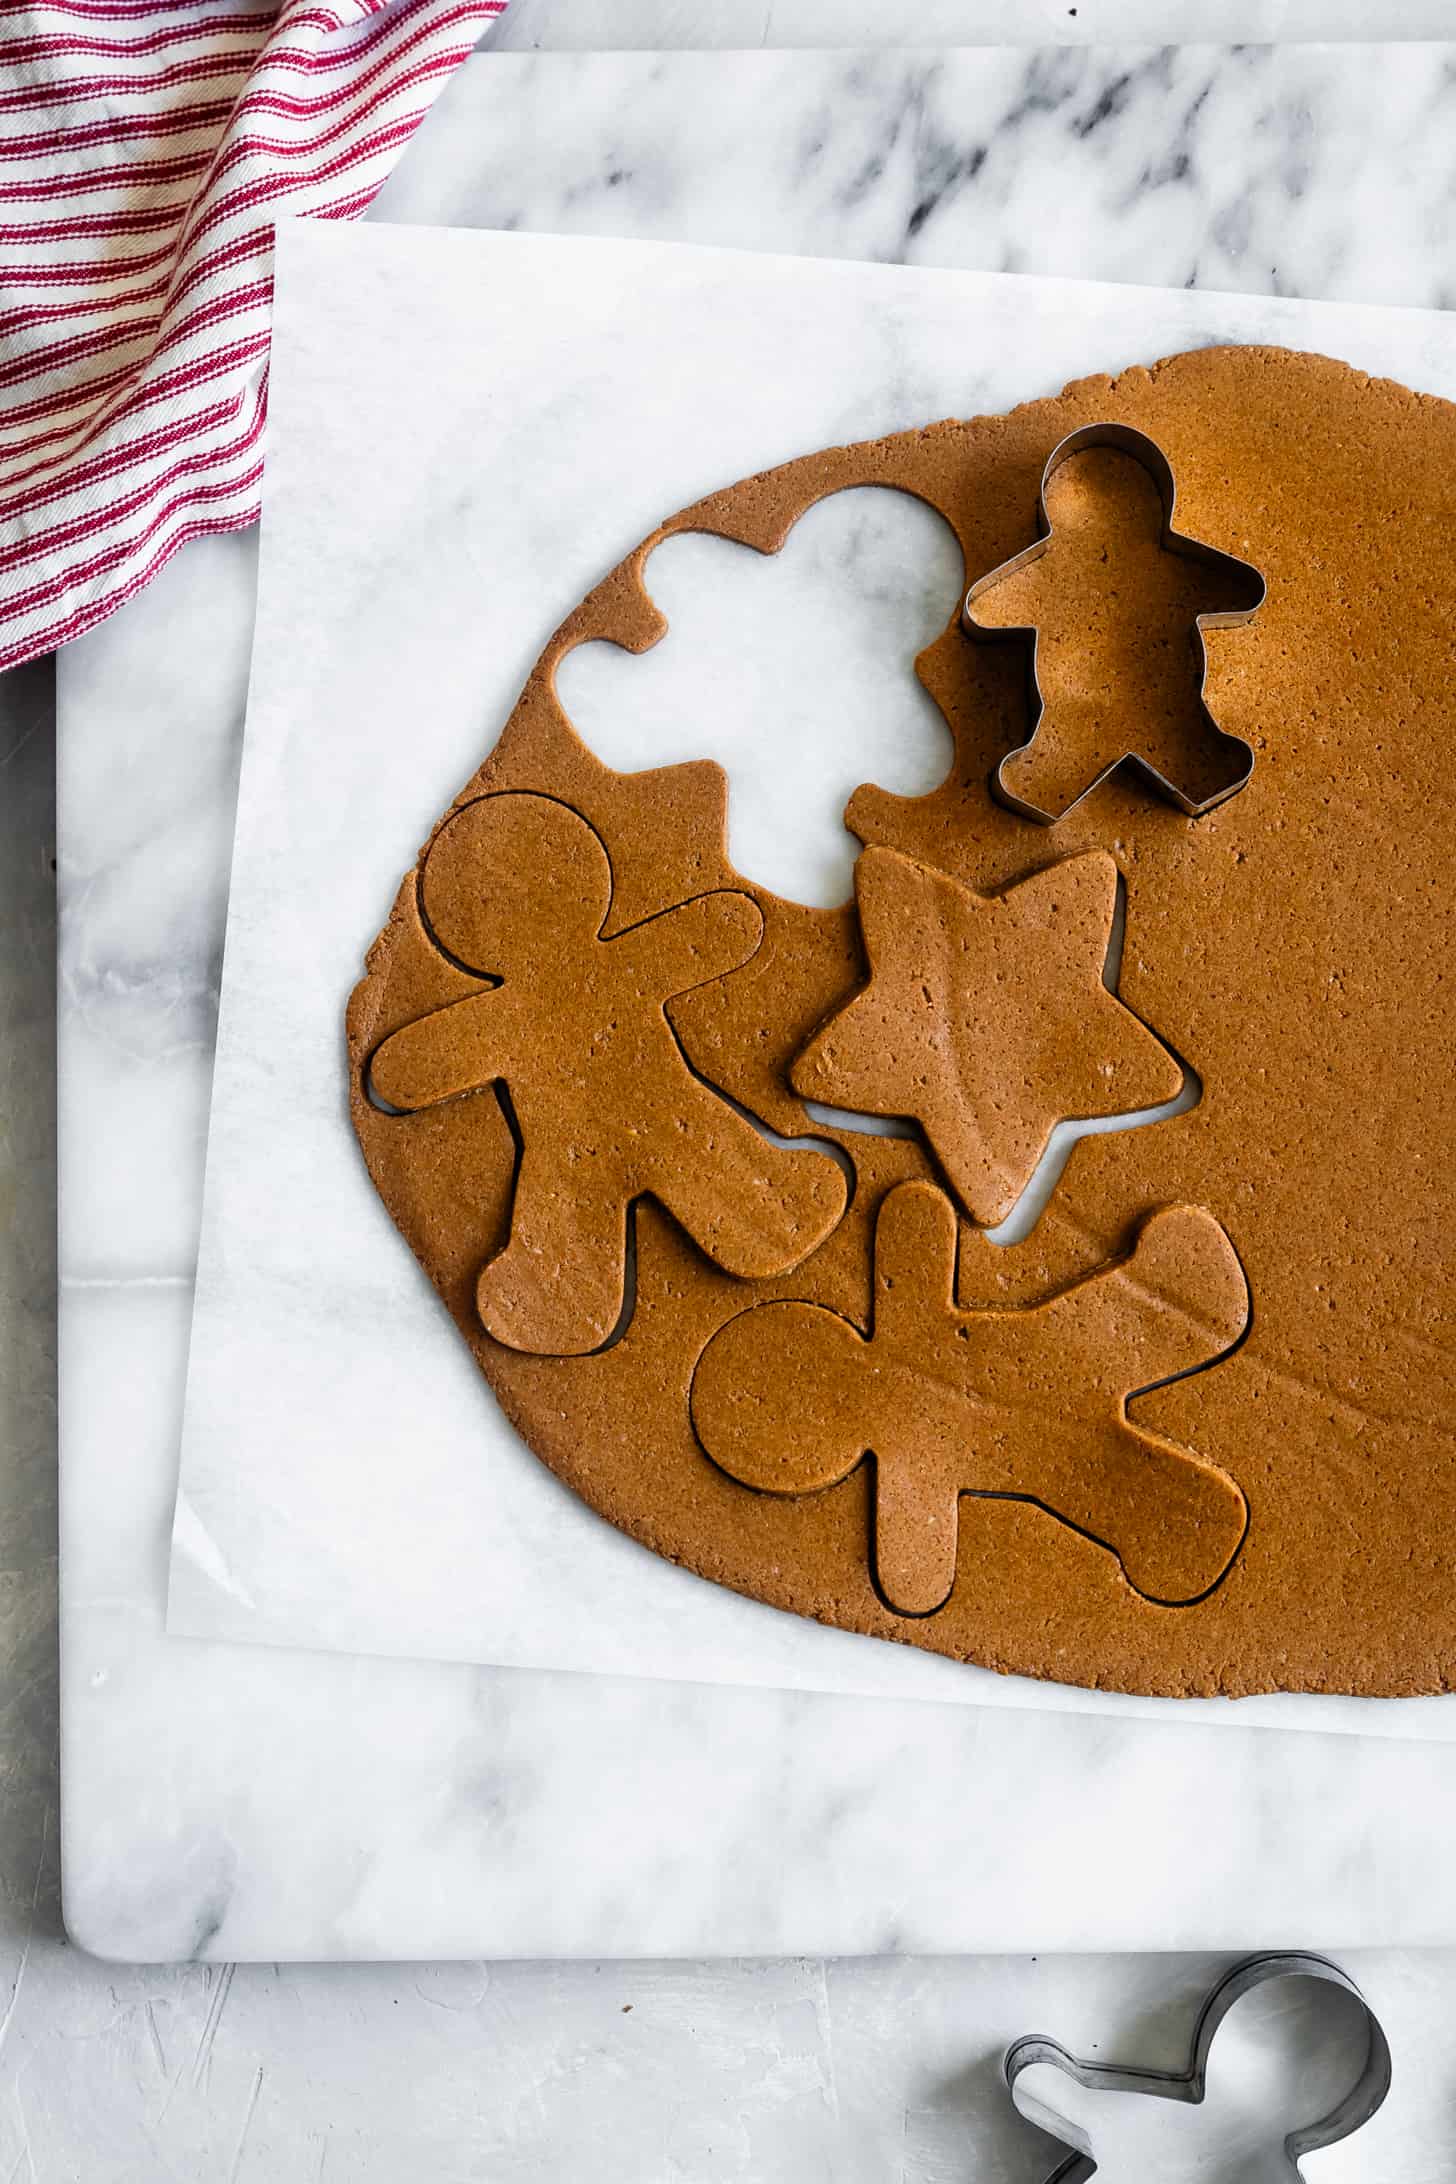 How to Cut-Out Gingerbread Cookies